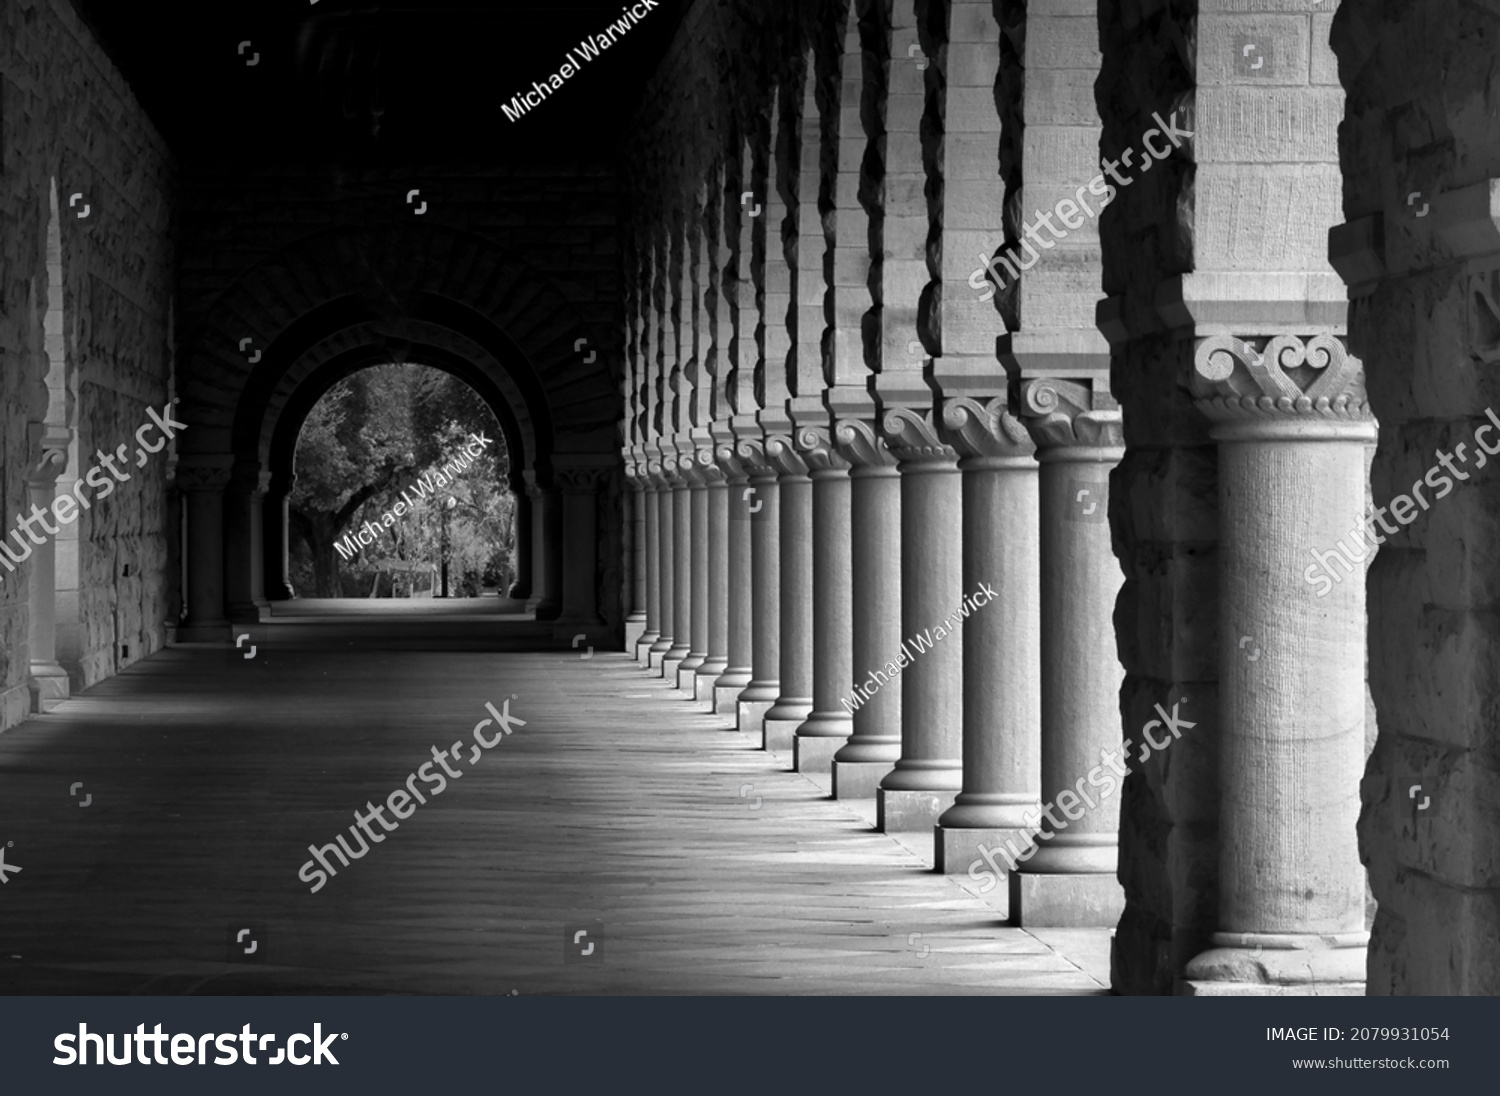 Stone Column of Pillars and Light in black and white. #2079931054